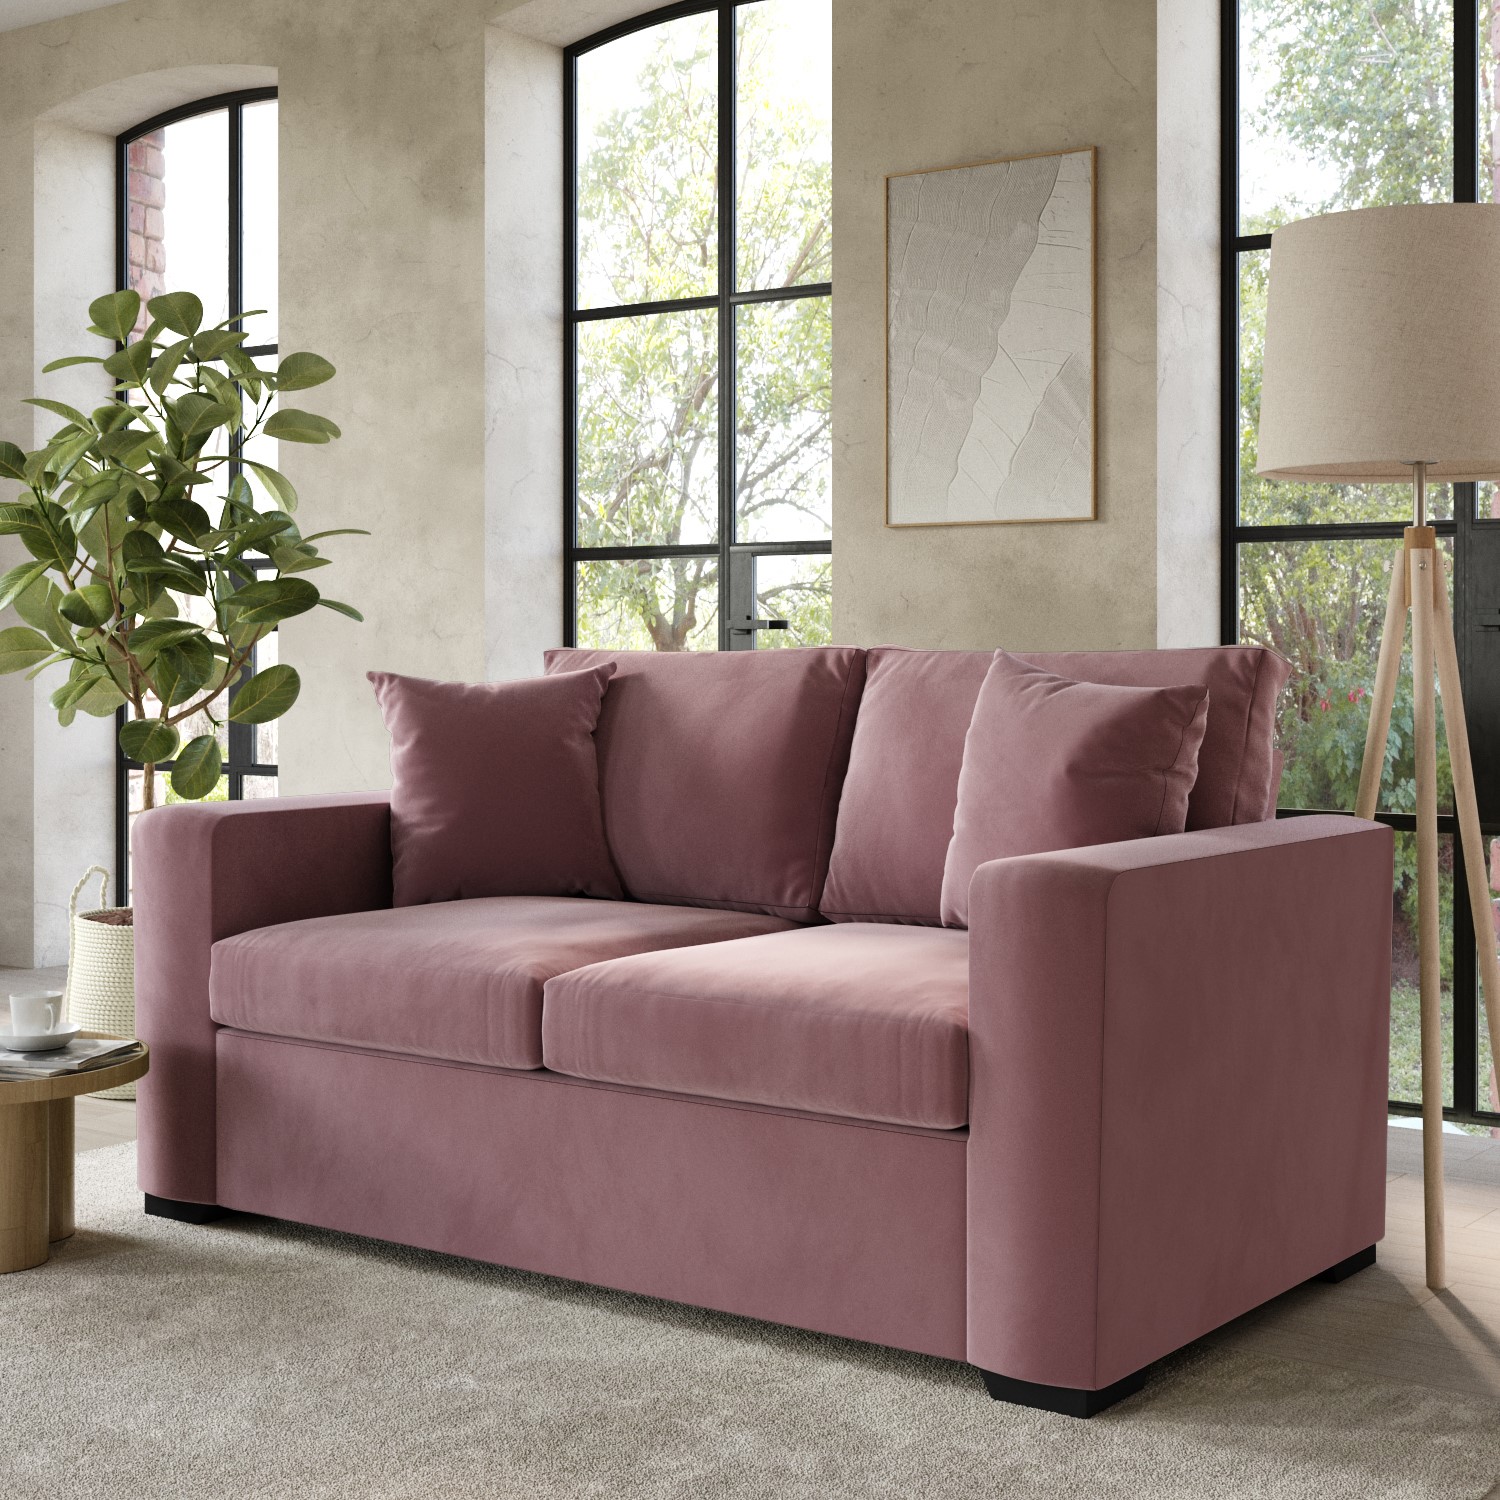 Photo of Pink velvet pull out sofa bed - seats 2 - layton